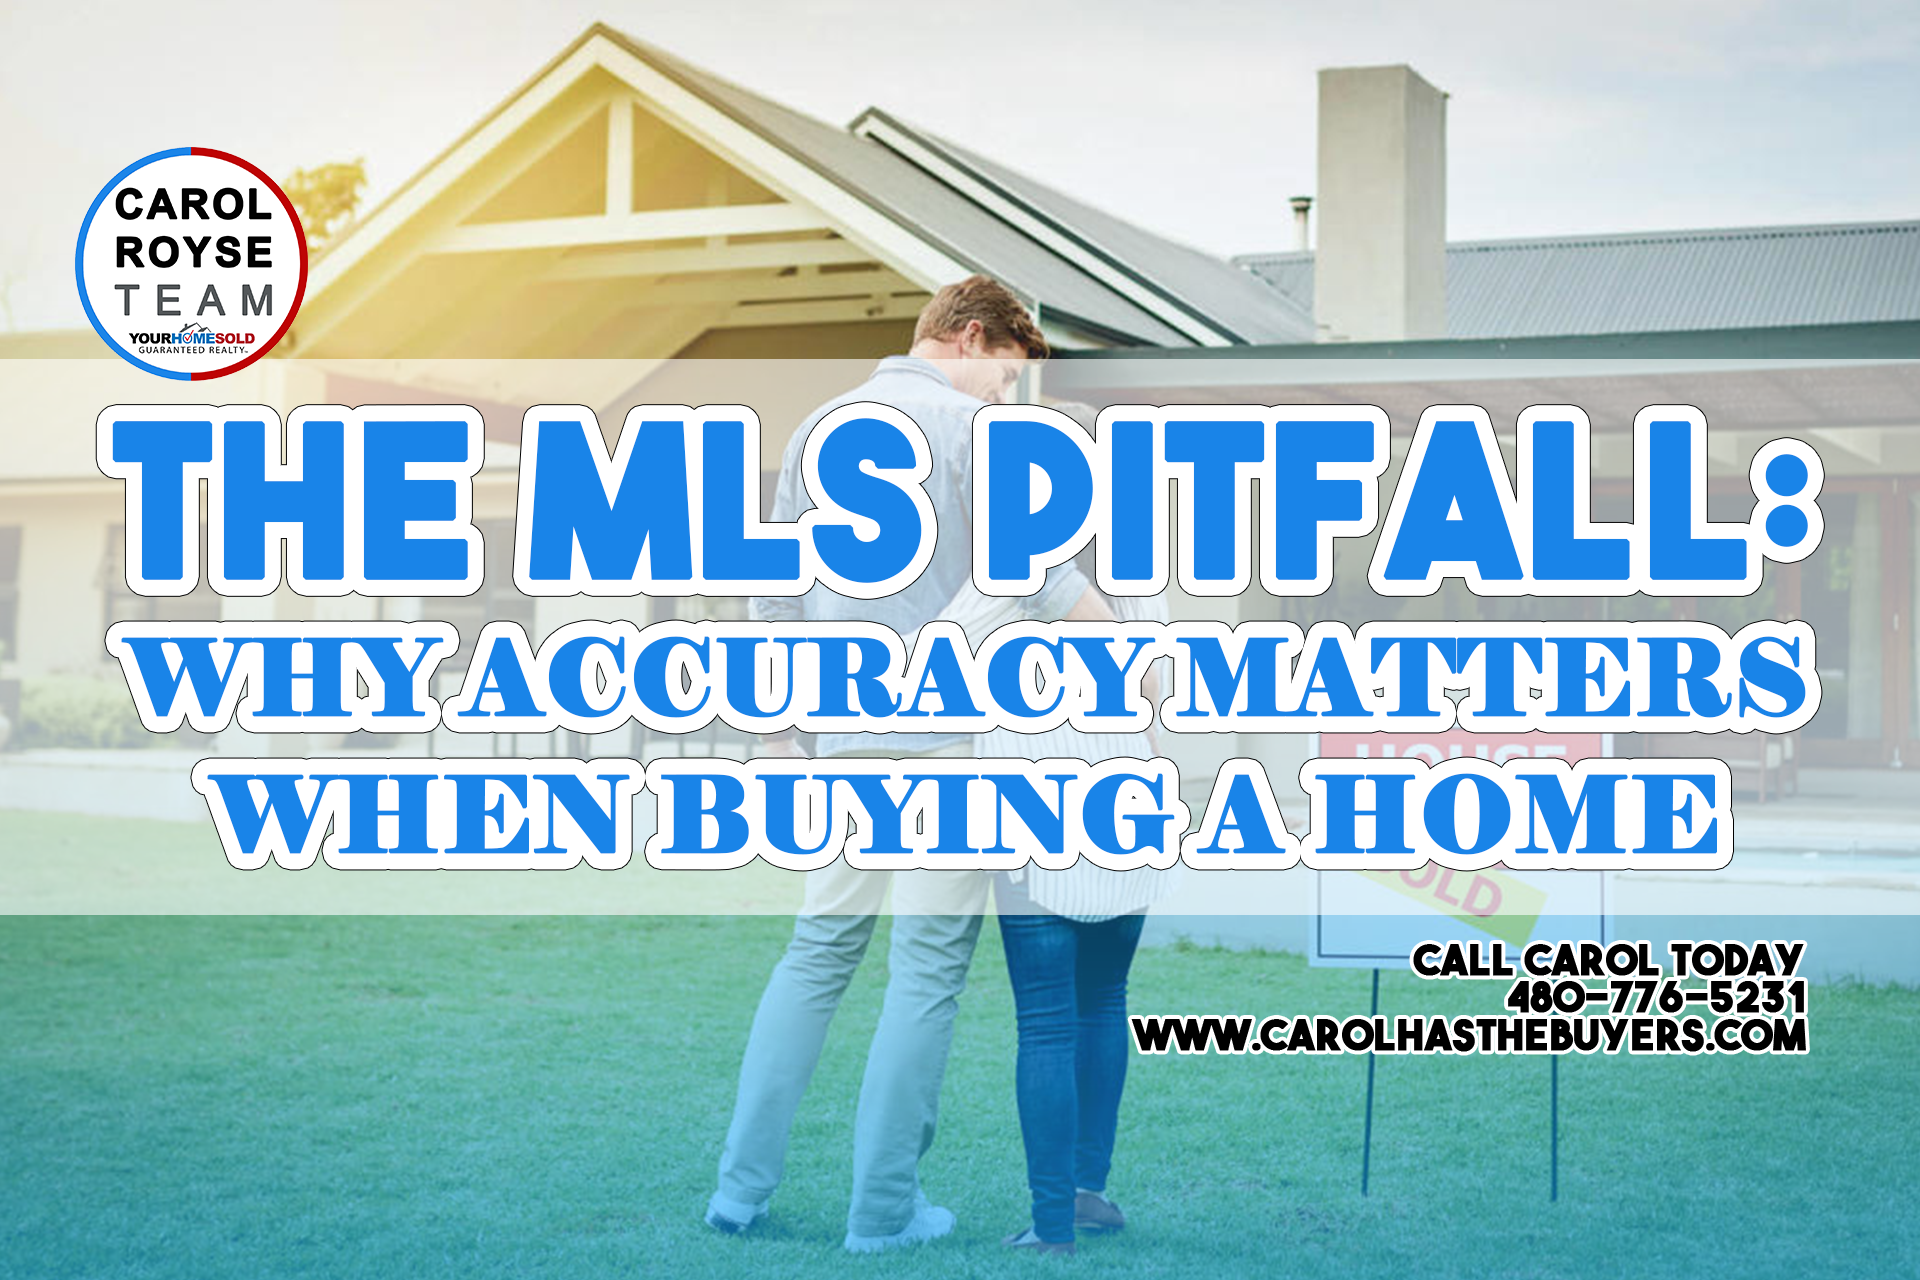 The MLS Pitfall: Why Accuracy Matters When Buying a Home